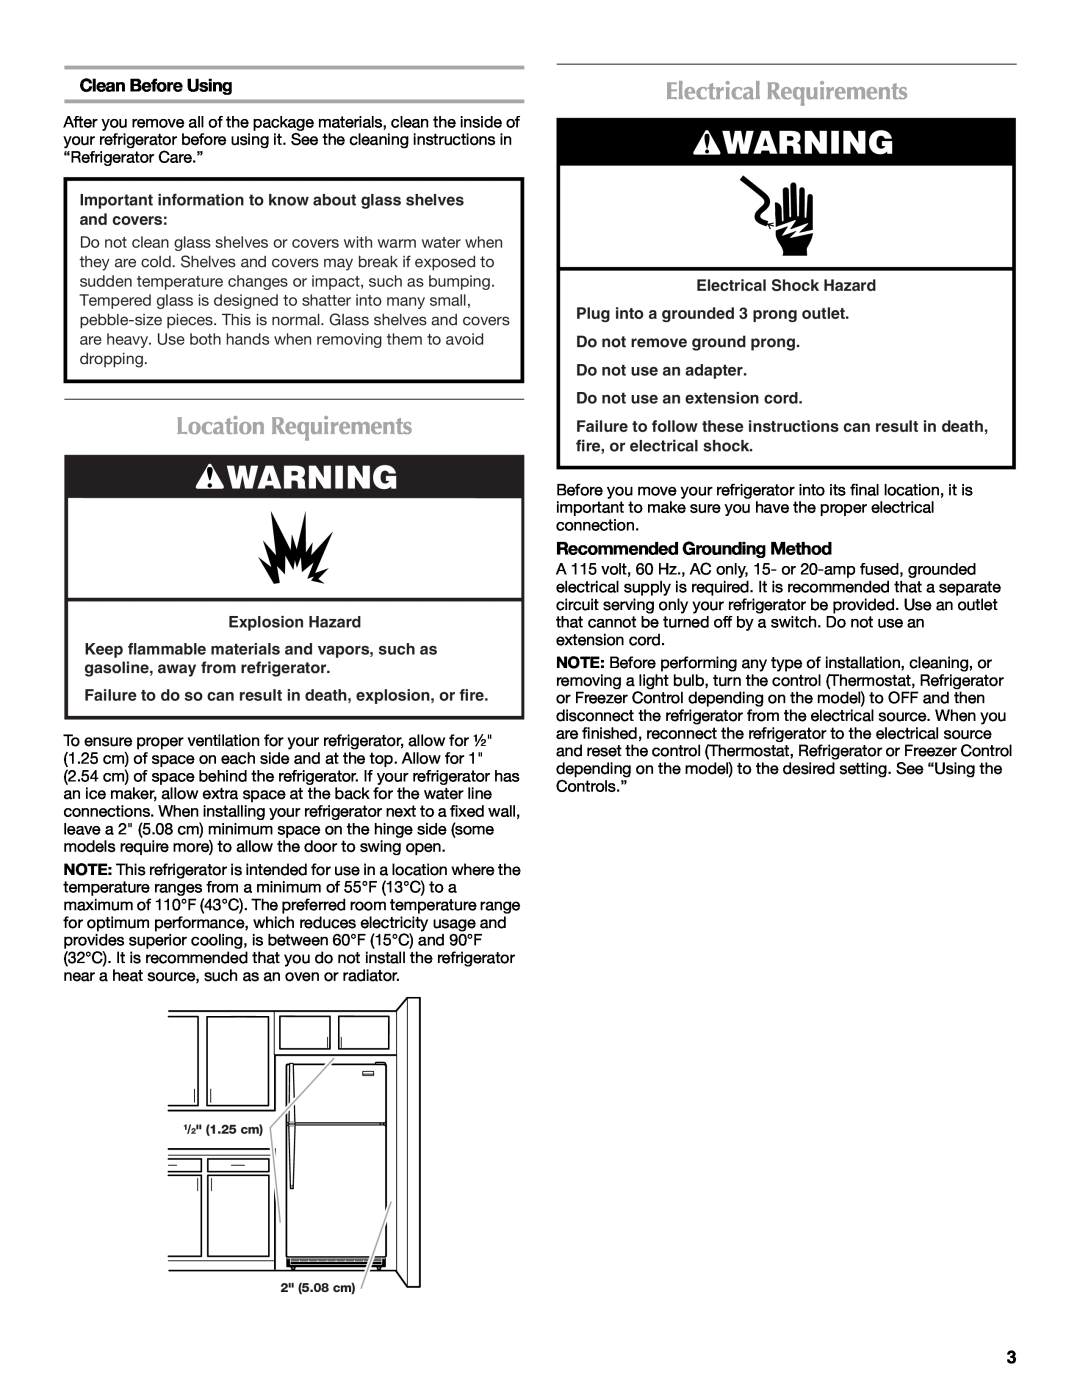 Maytag W10359302A Location Requirements, Electrical Requirements, Clean Before Using, Recommended Grounding Method 